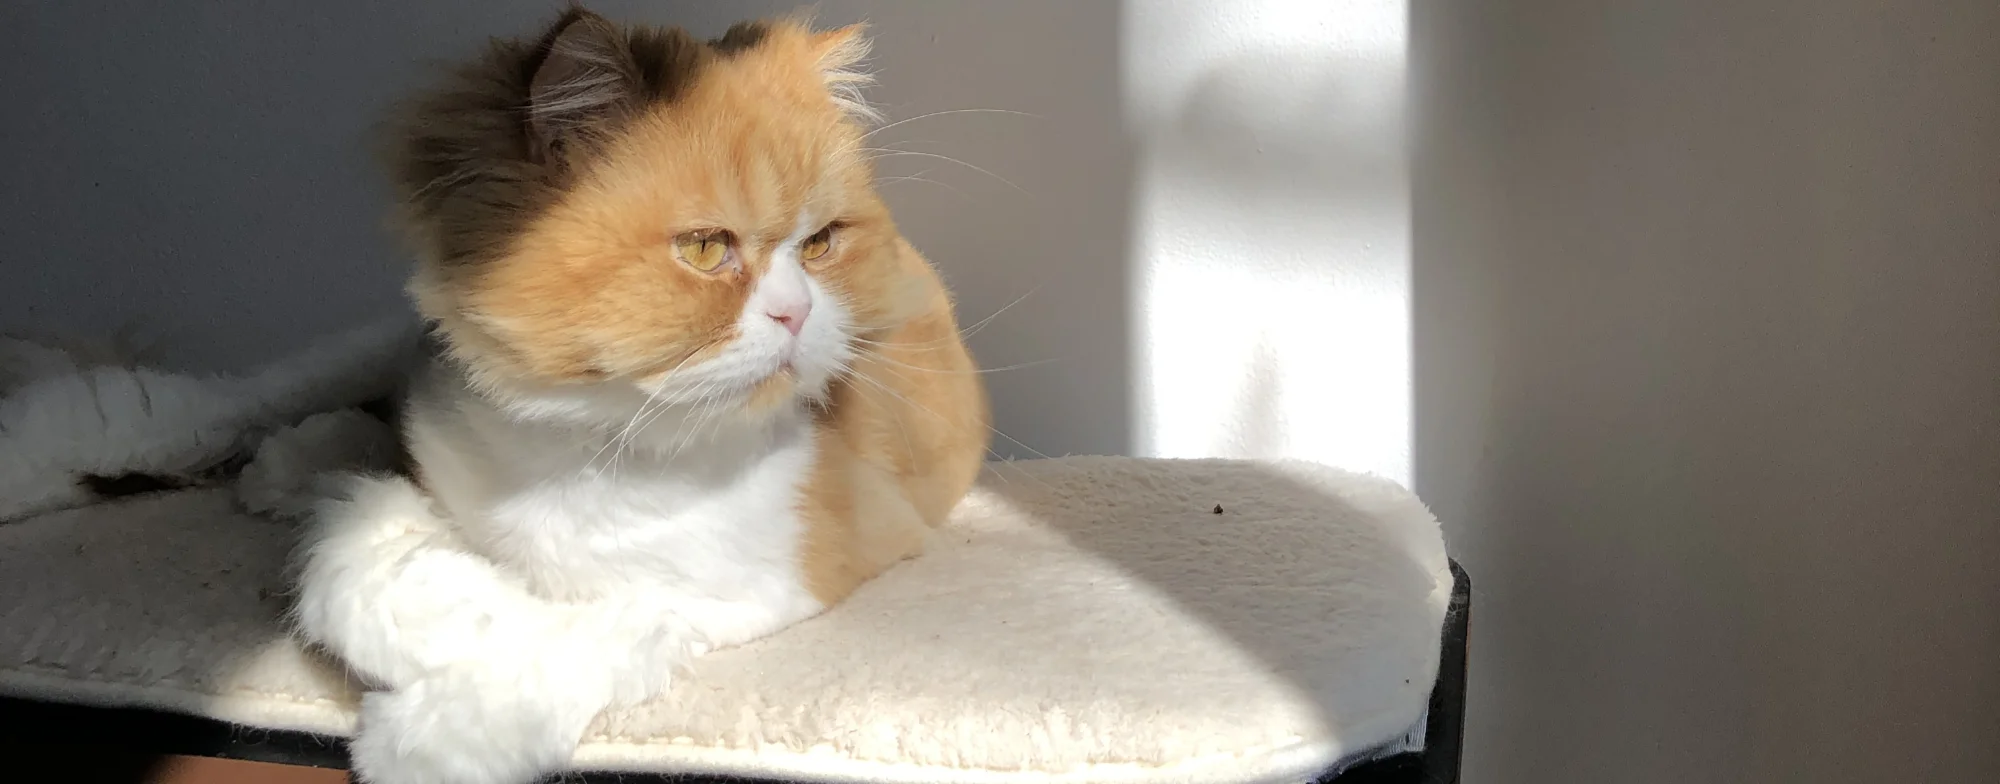 Image contains a photo of a orange and white cat sitting on a perch in the sunlight.